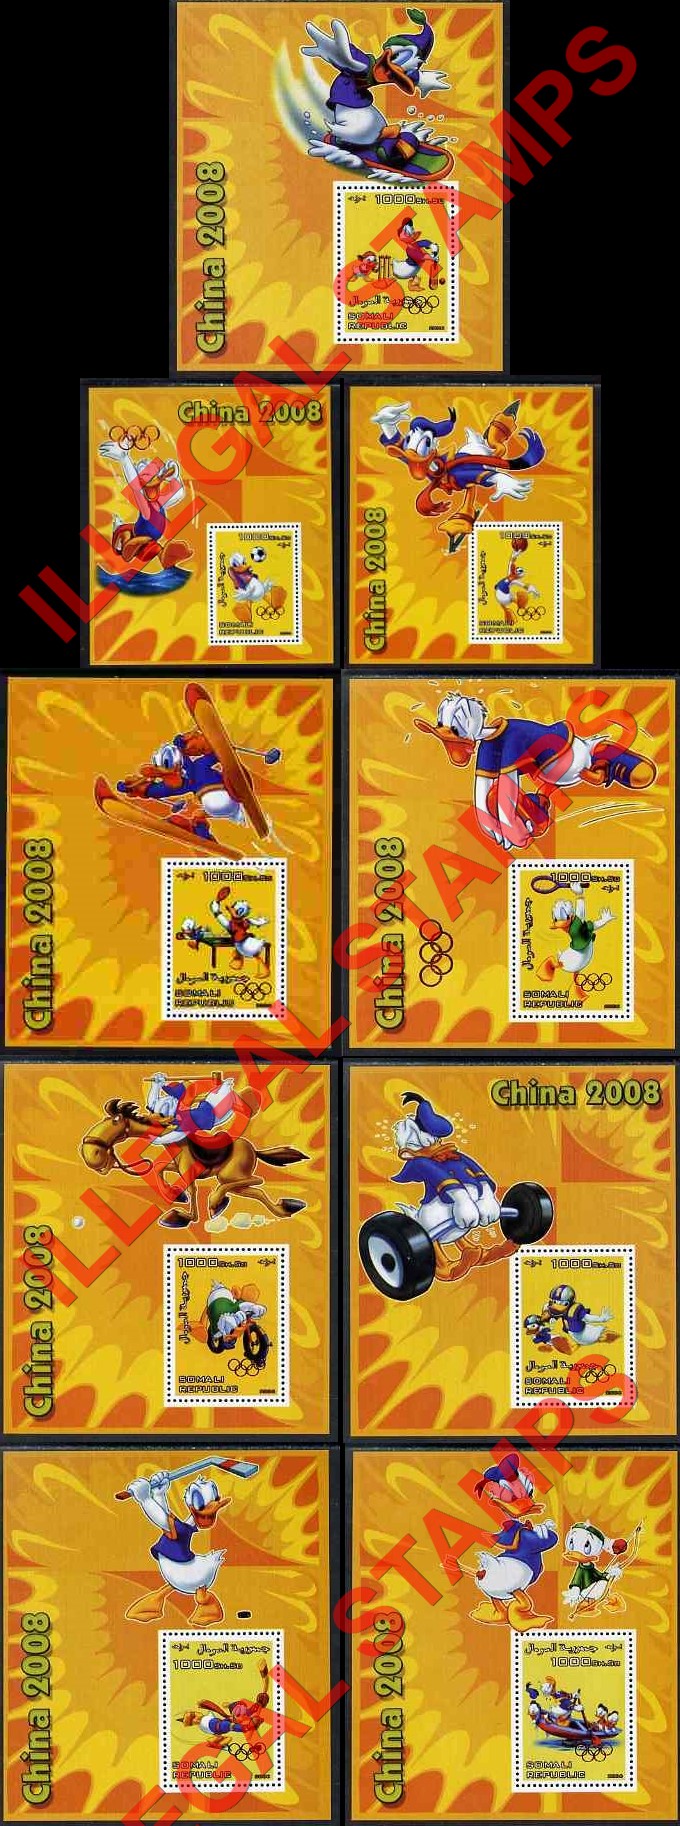 Somalia 2006 Donald Duck China 2008 Olympics Illegal Stamp Souvenir Sheets of 1 With Olympic Ring Overprints on the Stamp